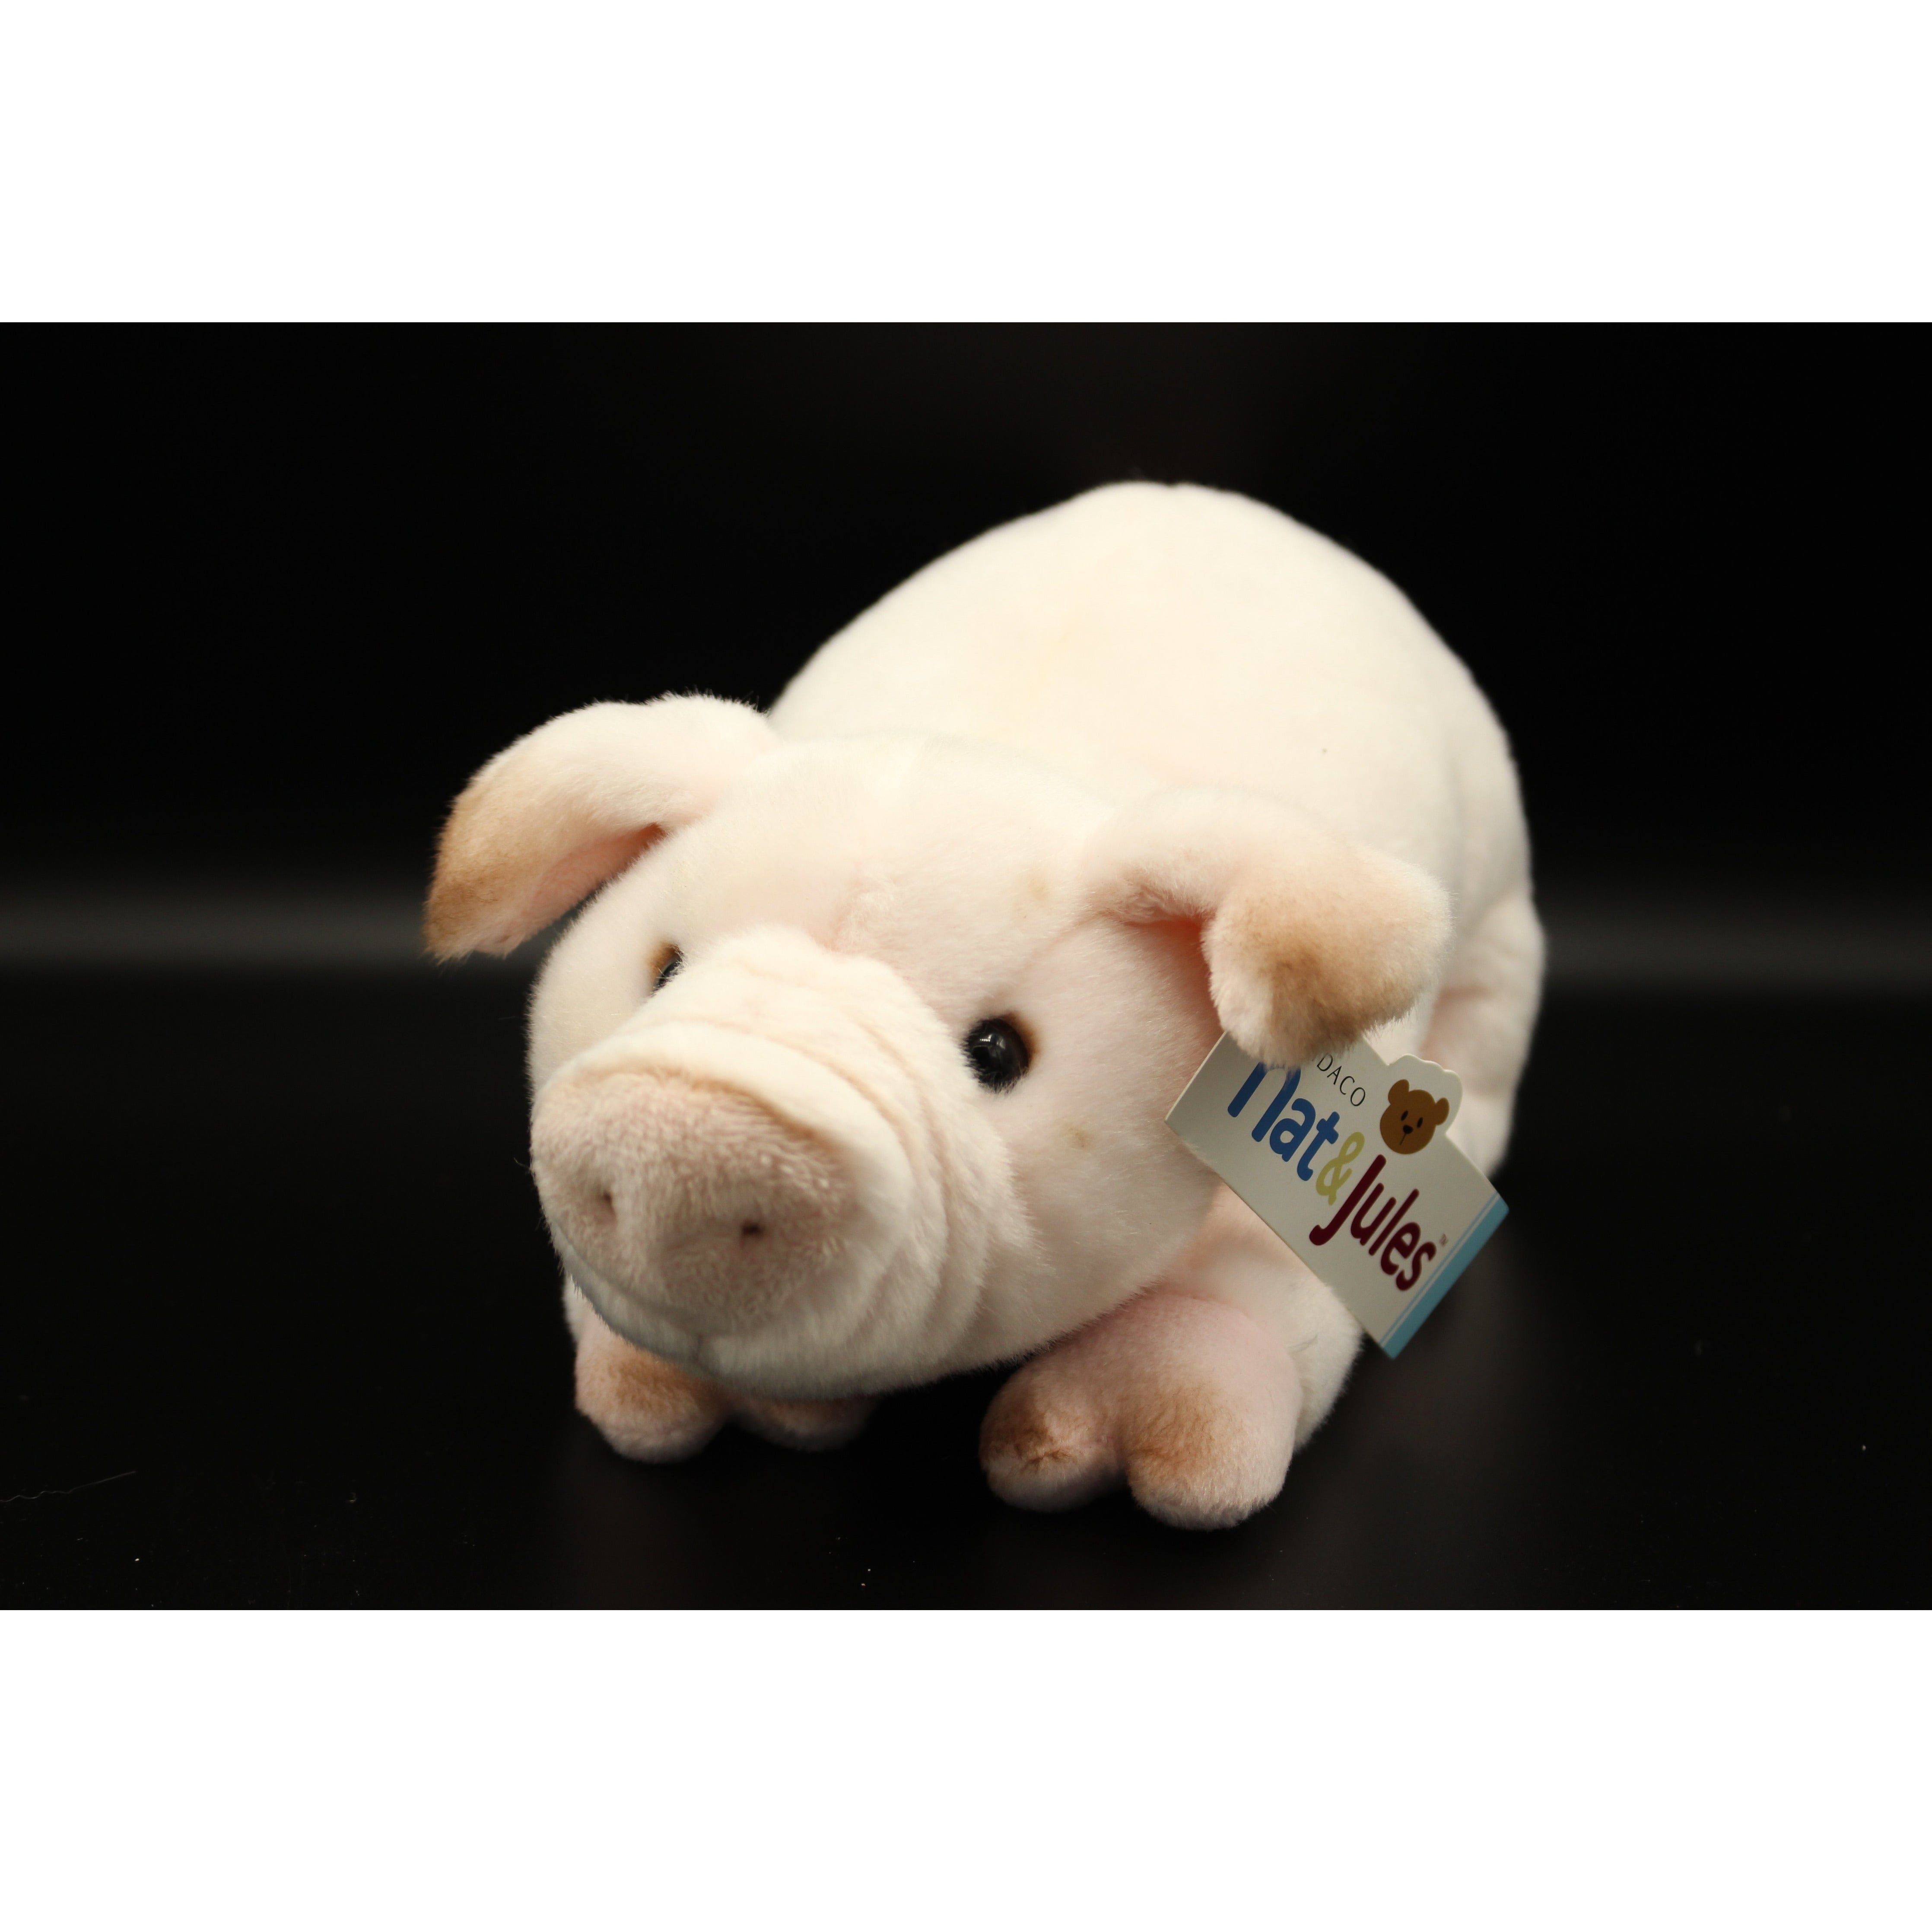 Plush Piggies! Piggy Wig the Birthday Pig and More! - The Pink Pigs, A Compassionate Boutique